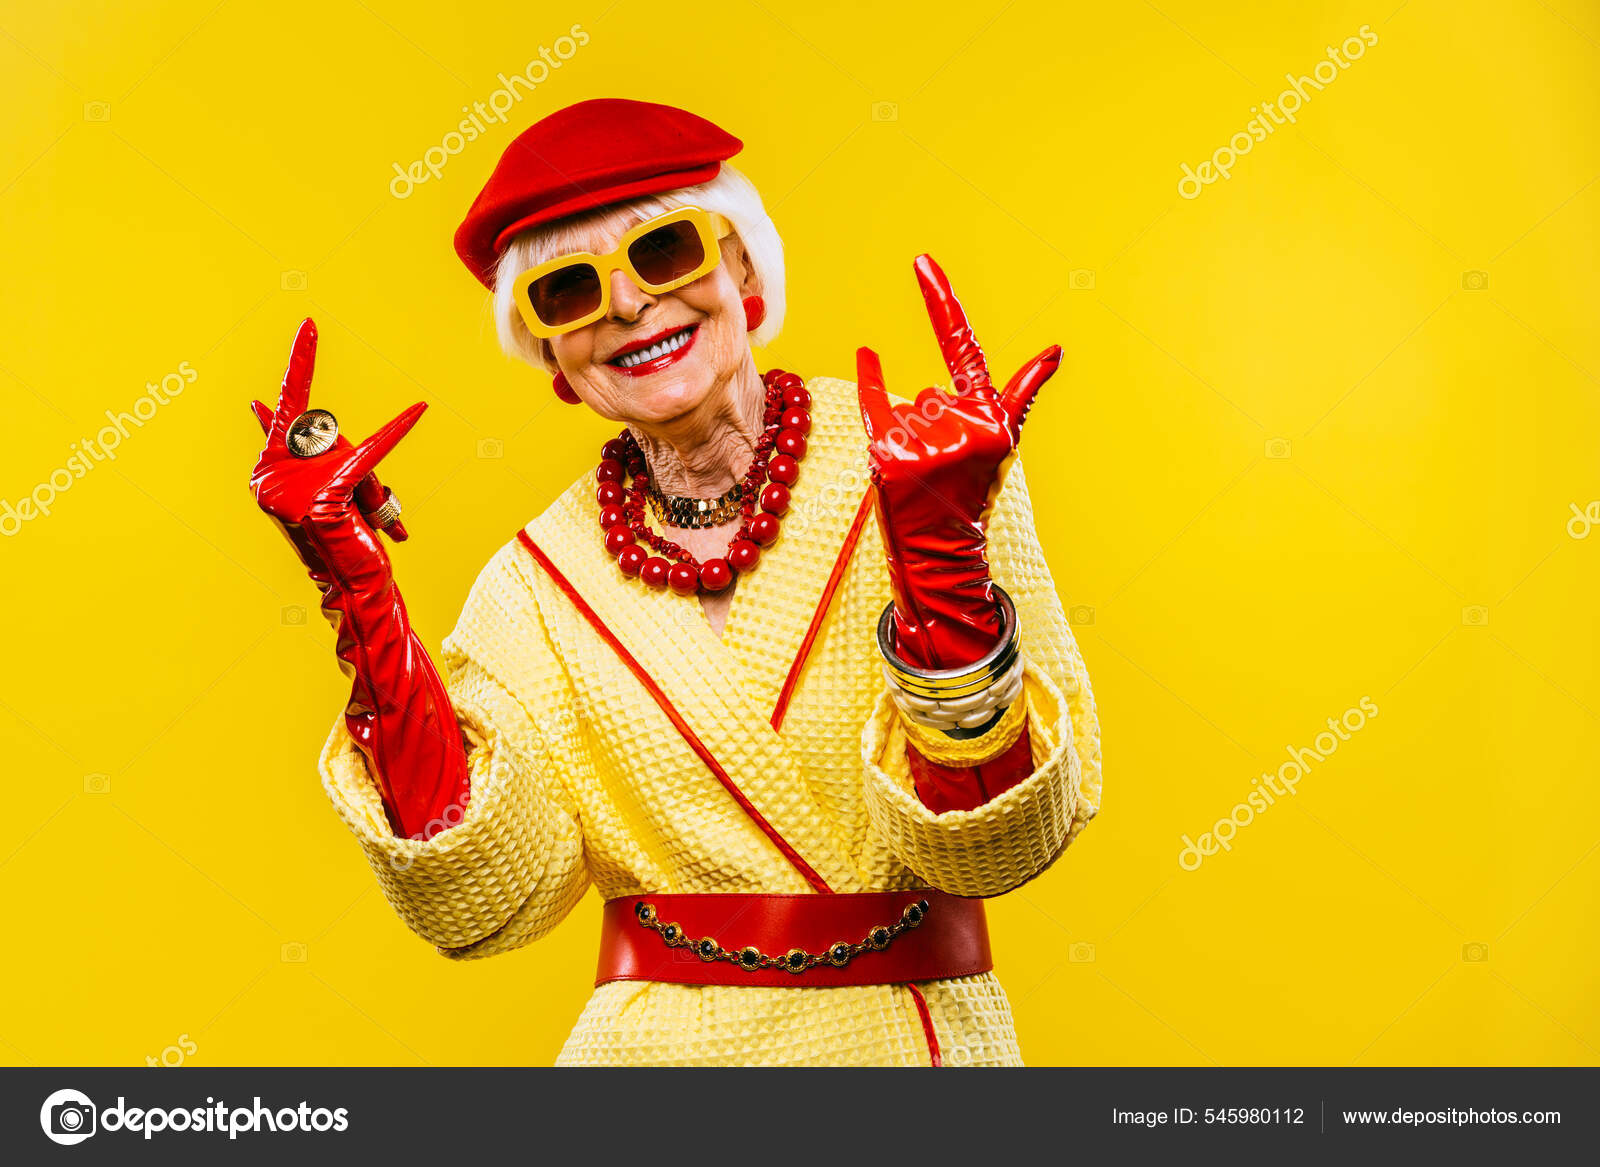 4,284 Funny Old Fashion Clothes Stock Photos - Free & Royalty-Free